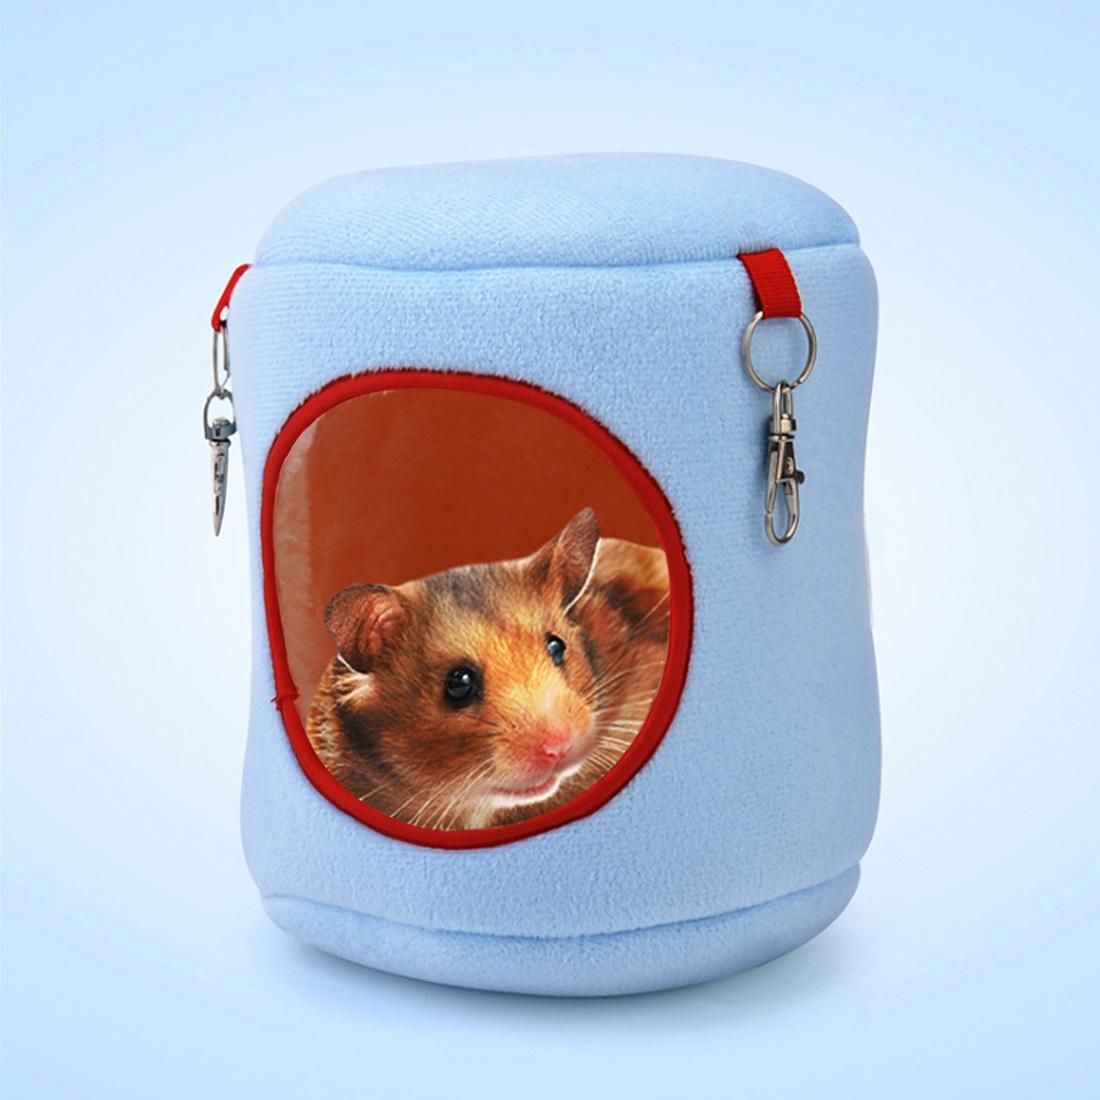 Flannel Cylinder Pet House Warm Hamster Hammock Hanging Bed Small Pets Nest, XL, Size:21*21*21cm (Blue)